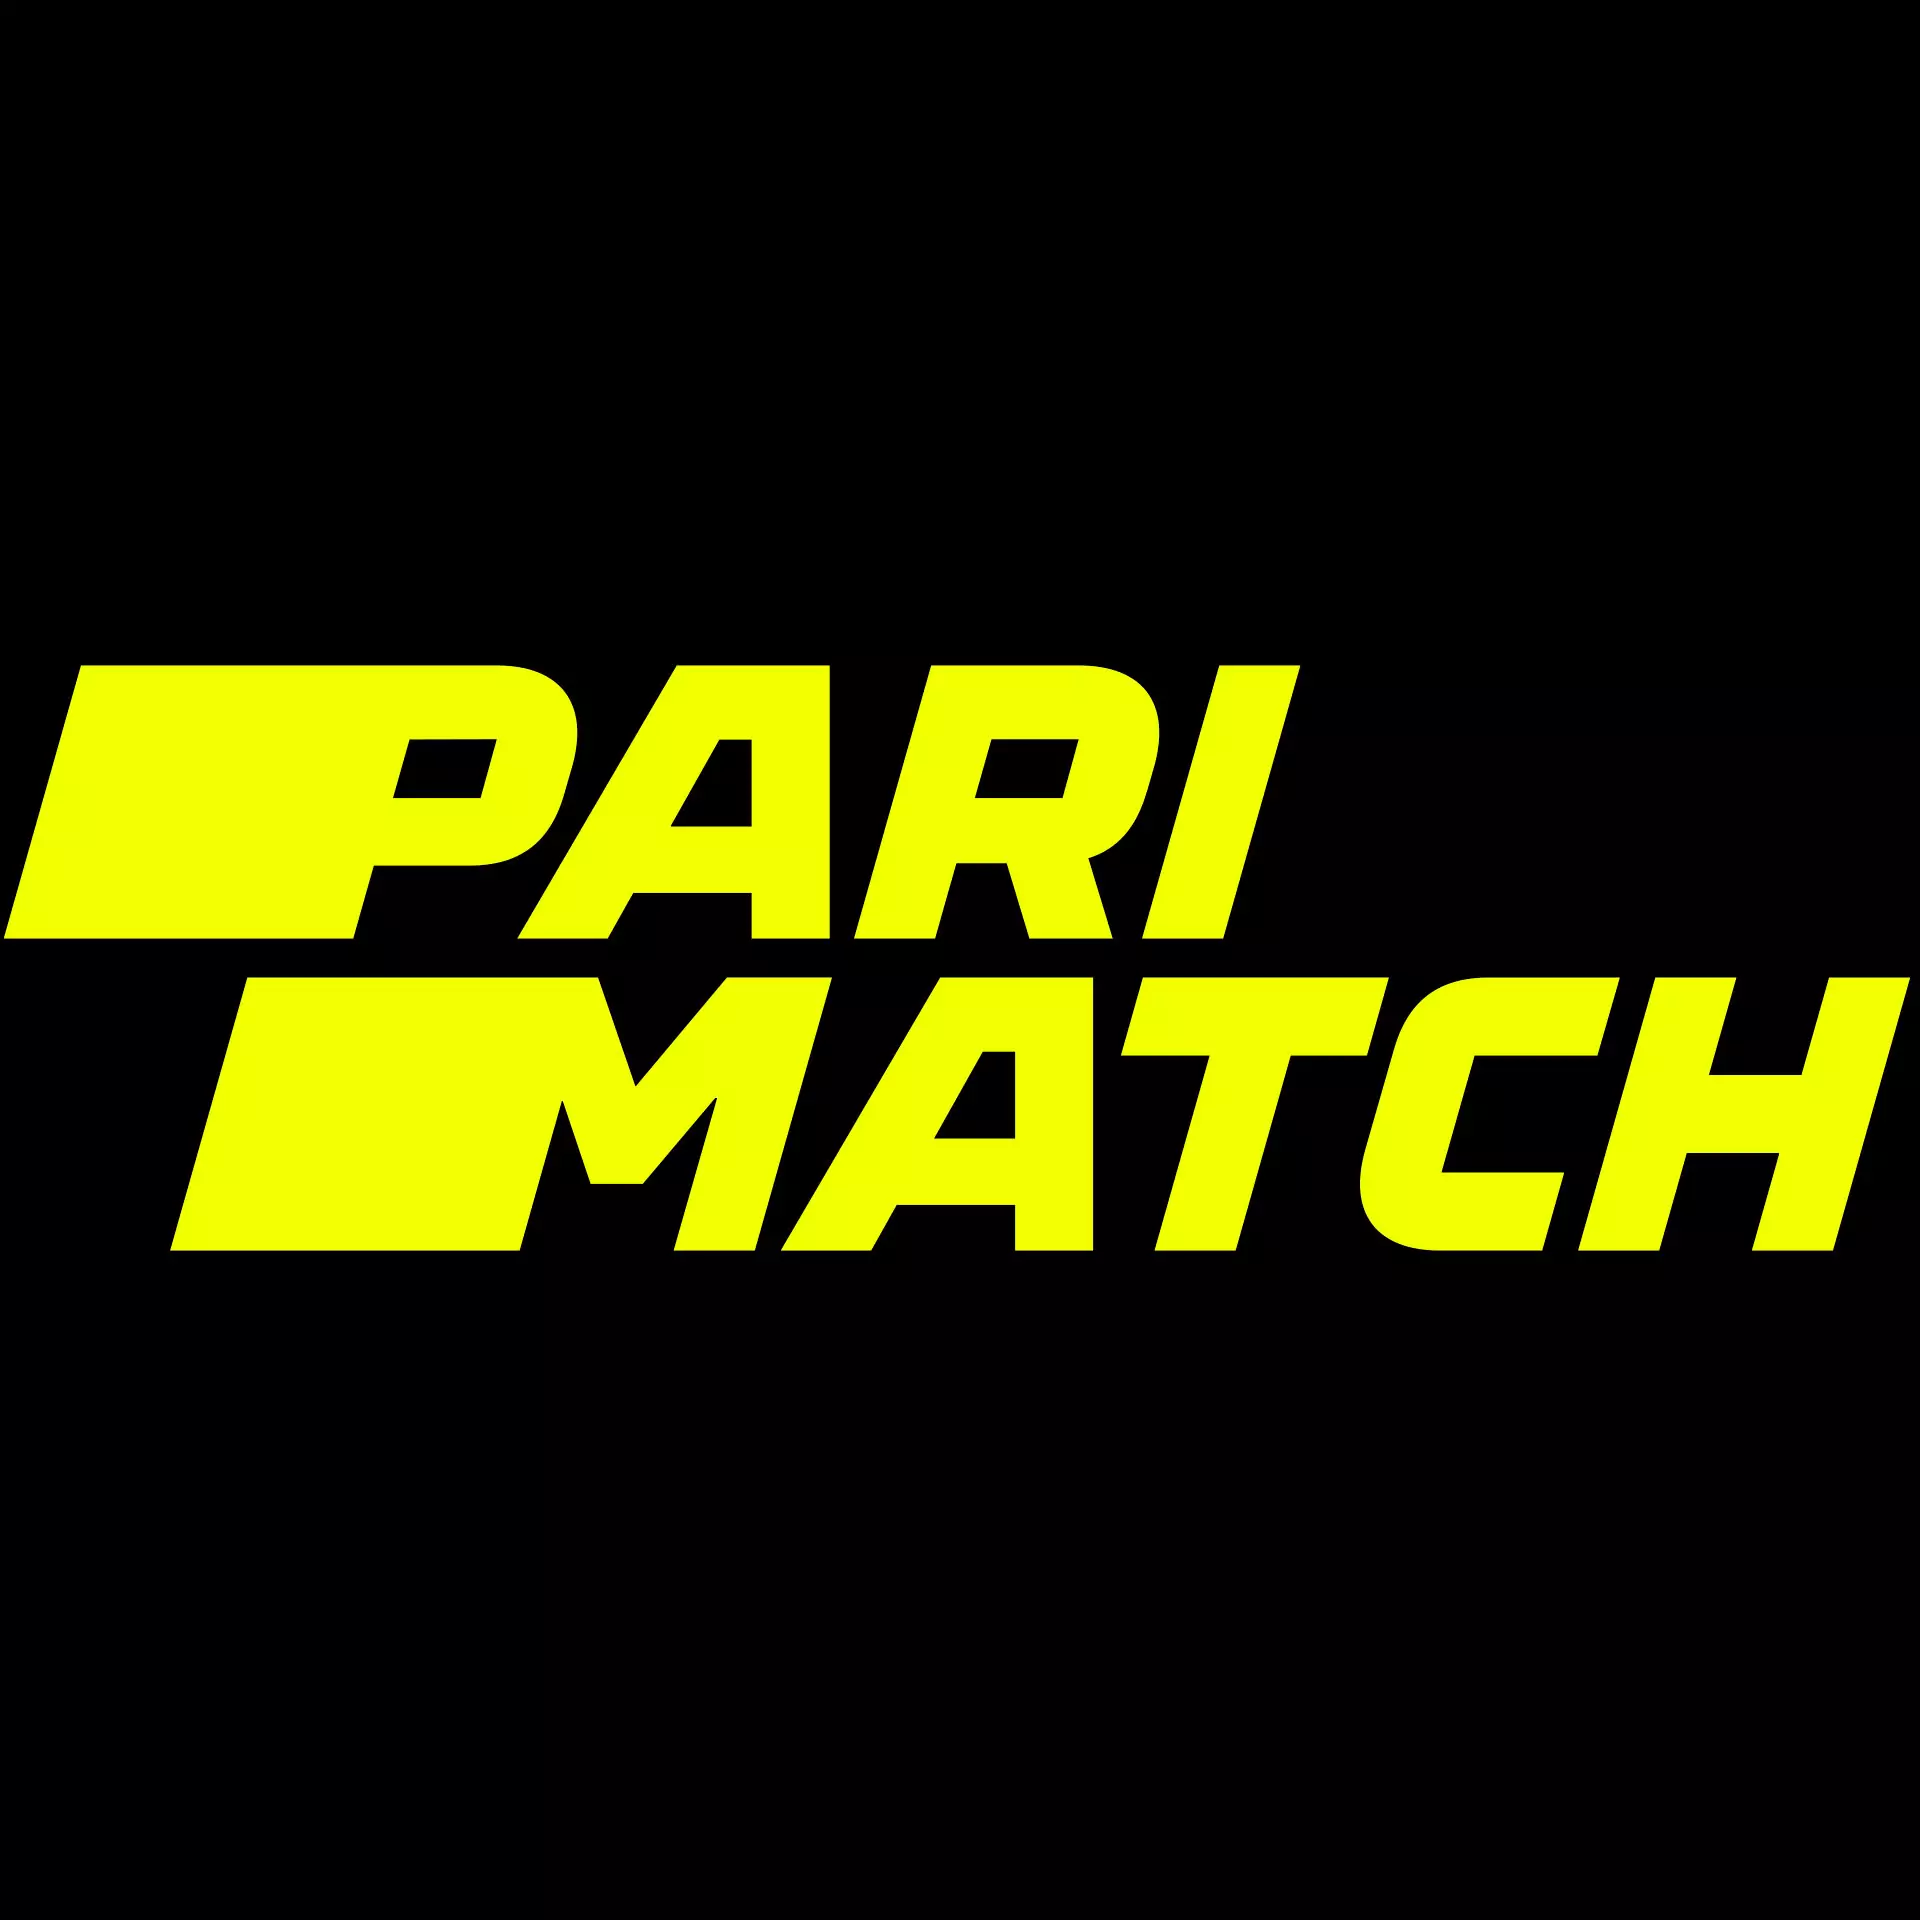 Read pros about Parimatch mobile app for cricket betting